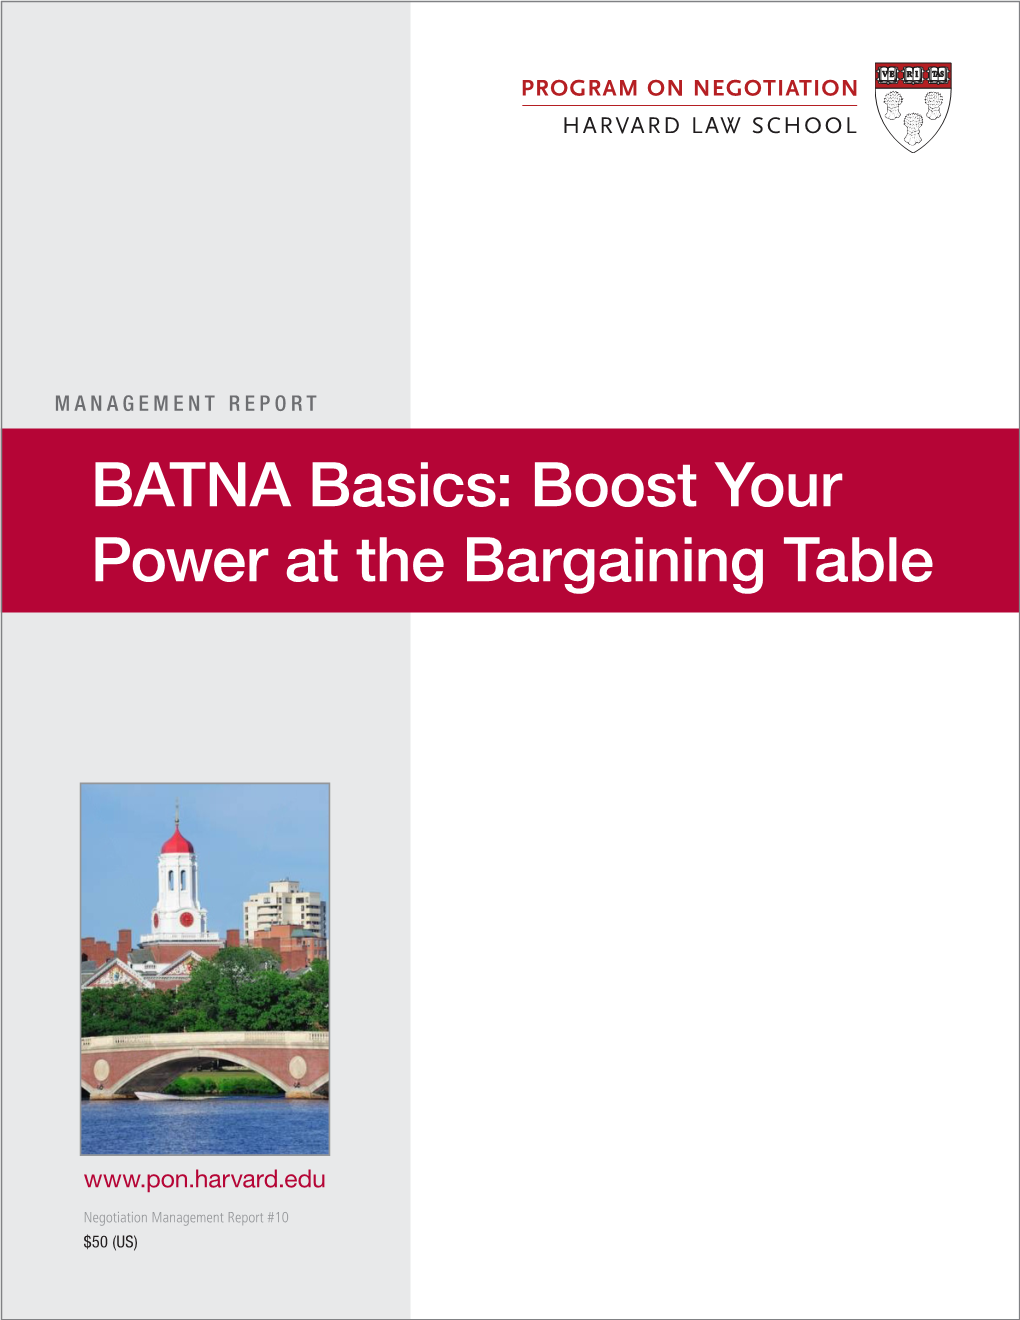 BATNA Basics: Boost Your Power at the Bargaining Table